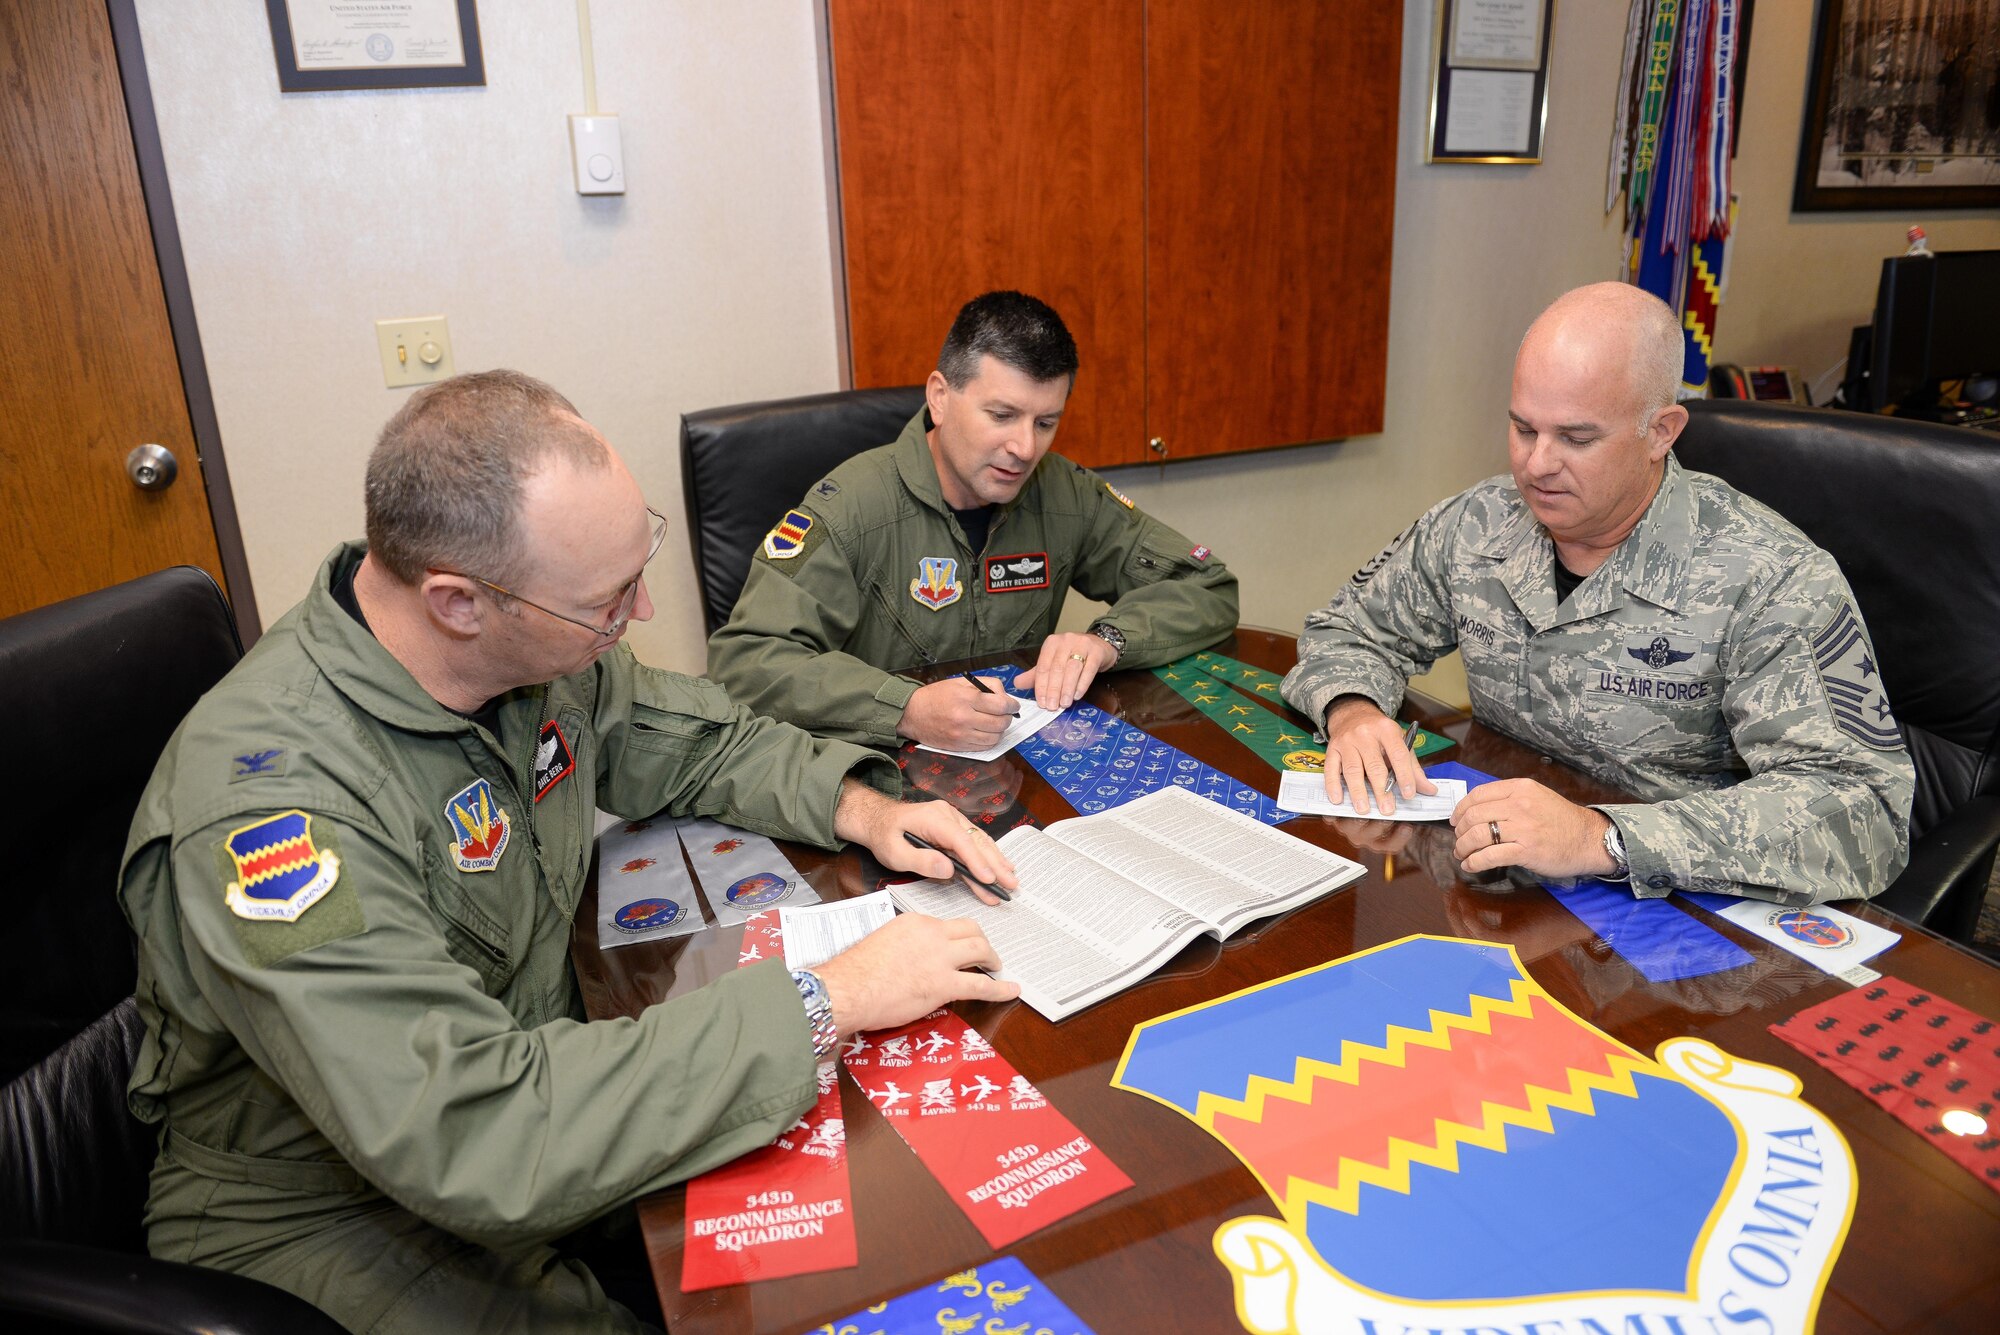 U.S. Air Force Col. Marty Reynolds (middle), 55th Wing commander, U.S. Air Force Col. David Berg (left), 55th Wing vice commander, and U.S. Air Force Chief Master Sgt. Michael Morris, 55th Wing command chief, sign Combined Federal Campaign letters in the wing headquarters building at Offutt Air Force Base, Neb., Oct. 7, 2016. The CFC is an annual fundraising drive that provides an opportunity for federal civilian, postal and military employees to donate to local, national and international non-profit organizations. (U.S. Air Force photo by Zachary Hada)